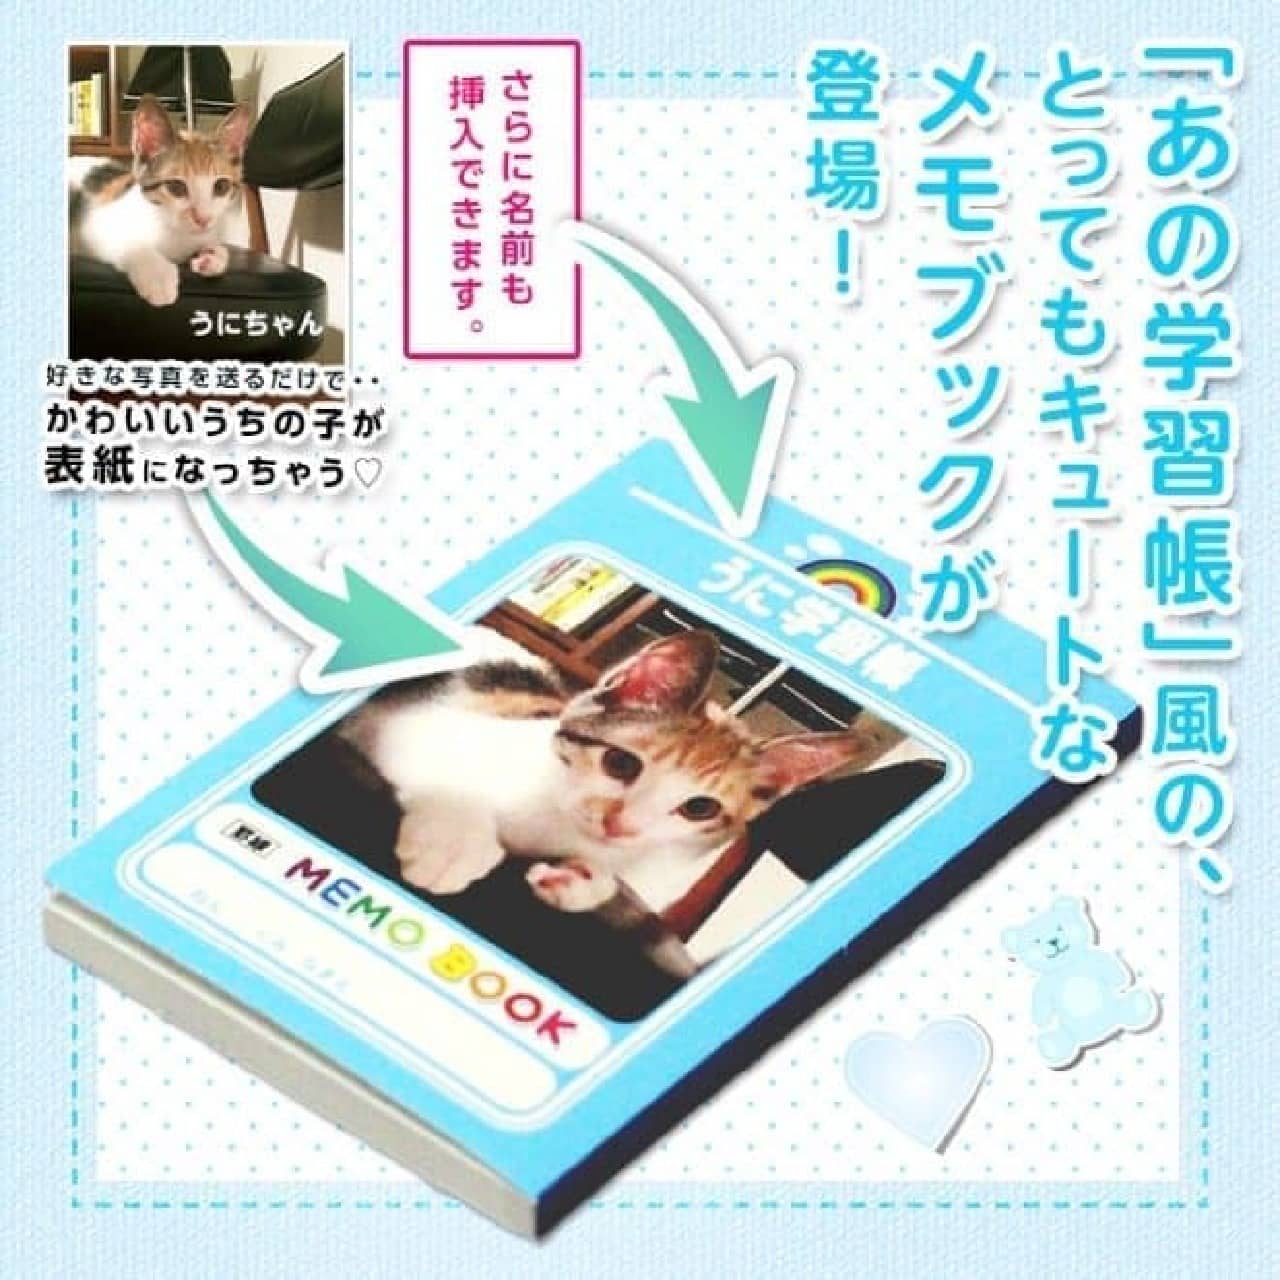 My child study book! … A study book-style memo book made from pictures of cats and dogs